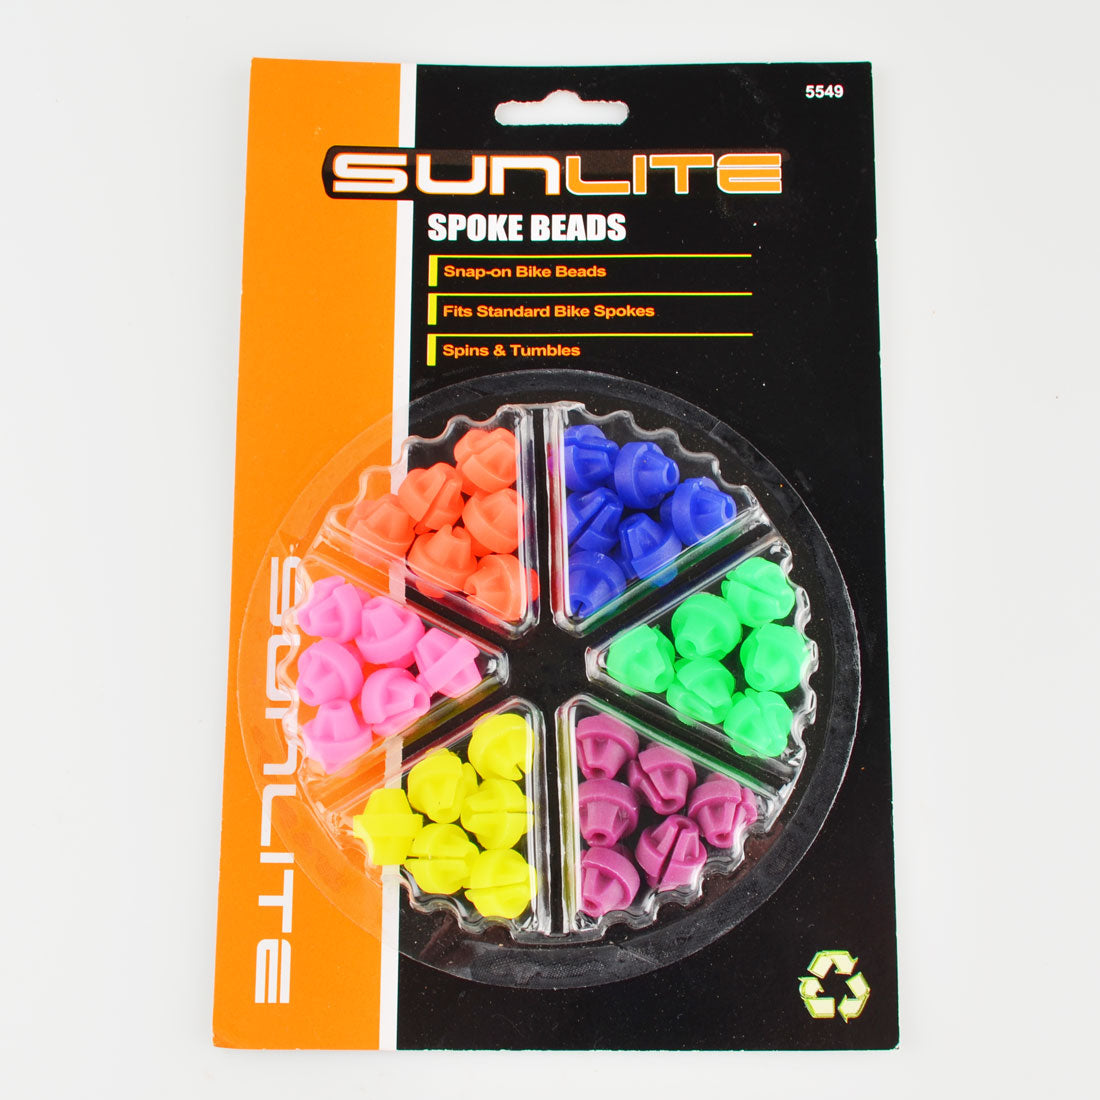 Spoke Beads Sunlite 36 Beads in 6 Assorted Colors - NEW